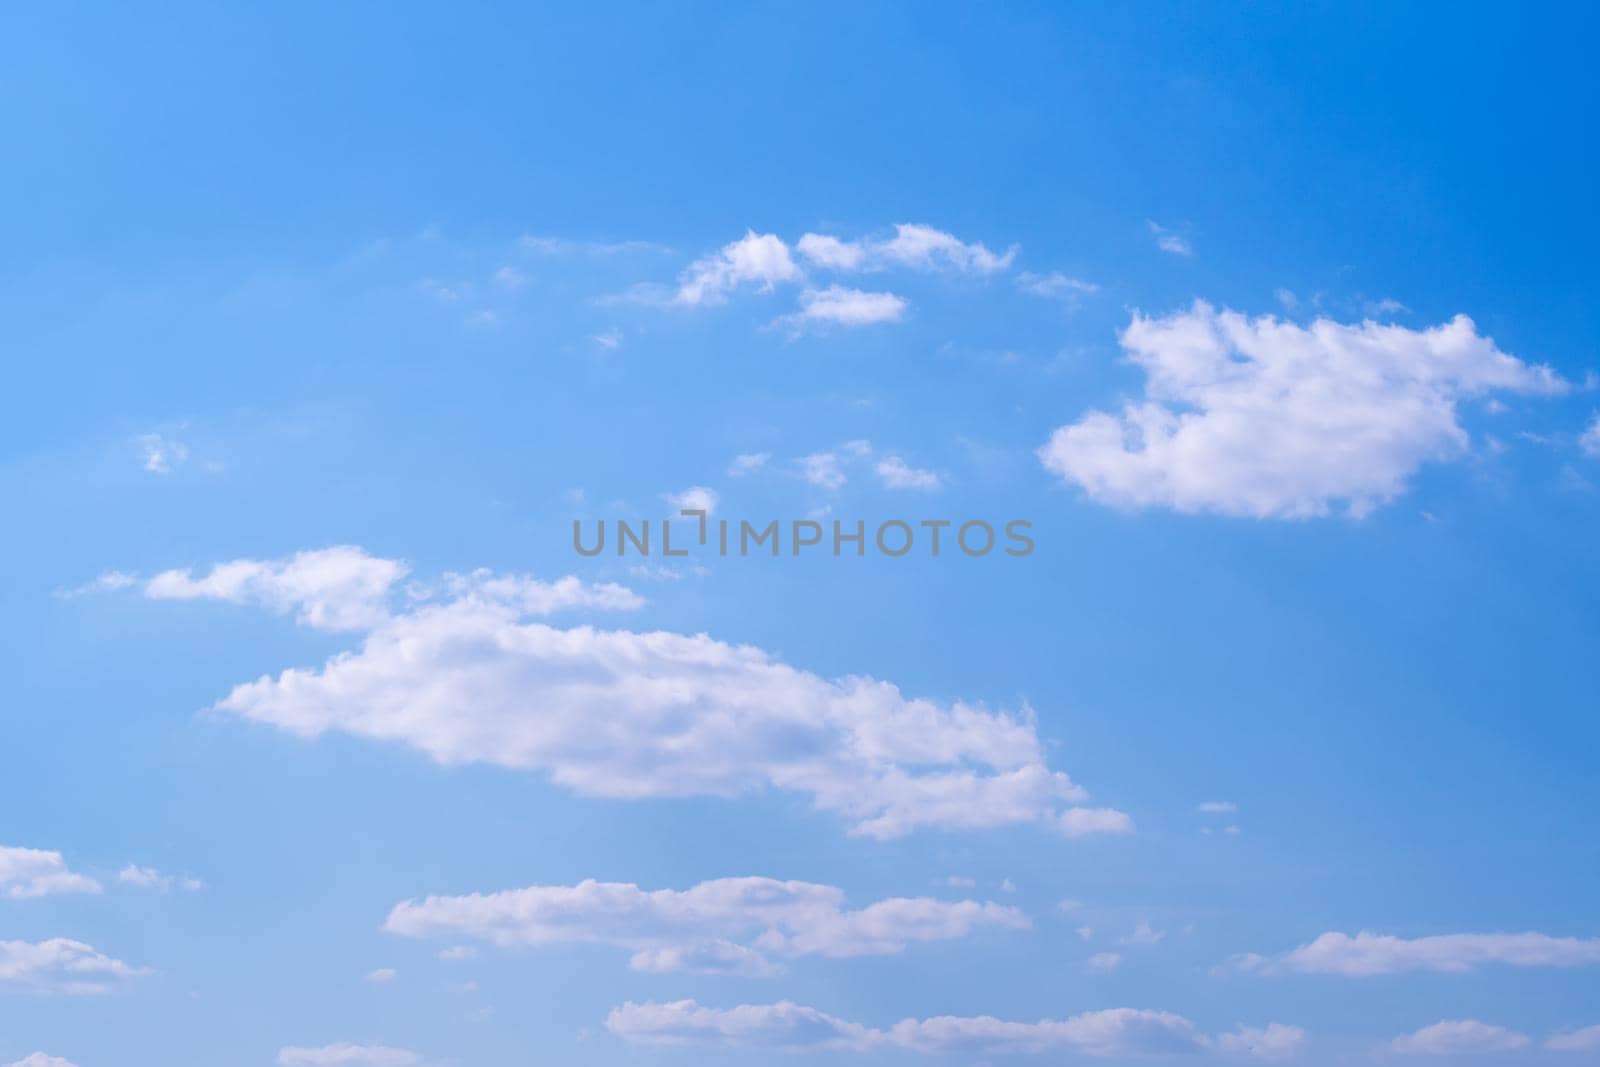 Natural blue sky with cloud closeup or background